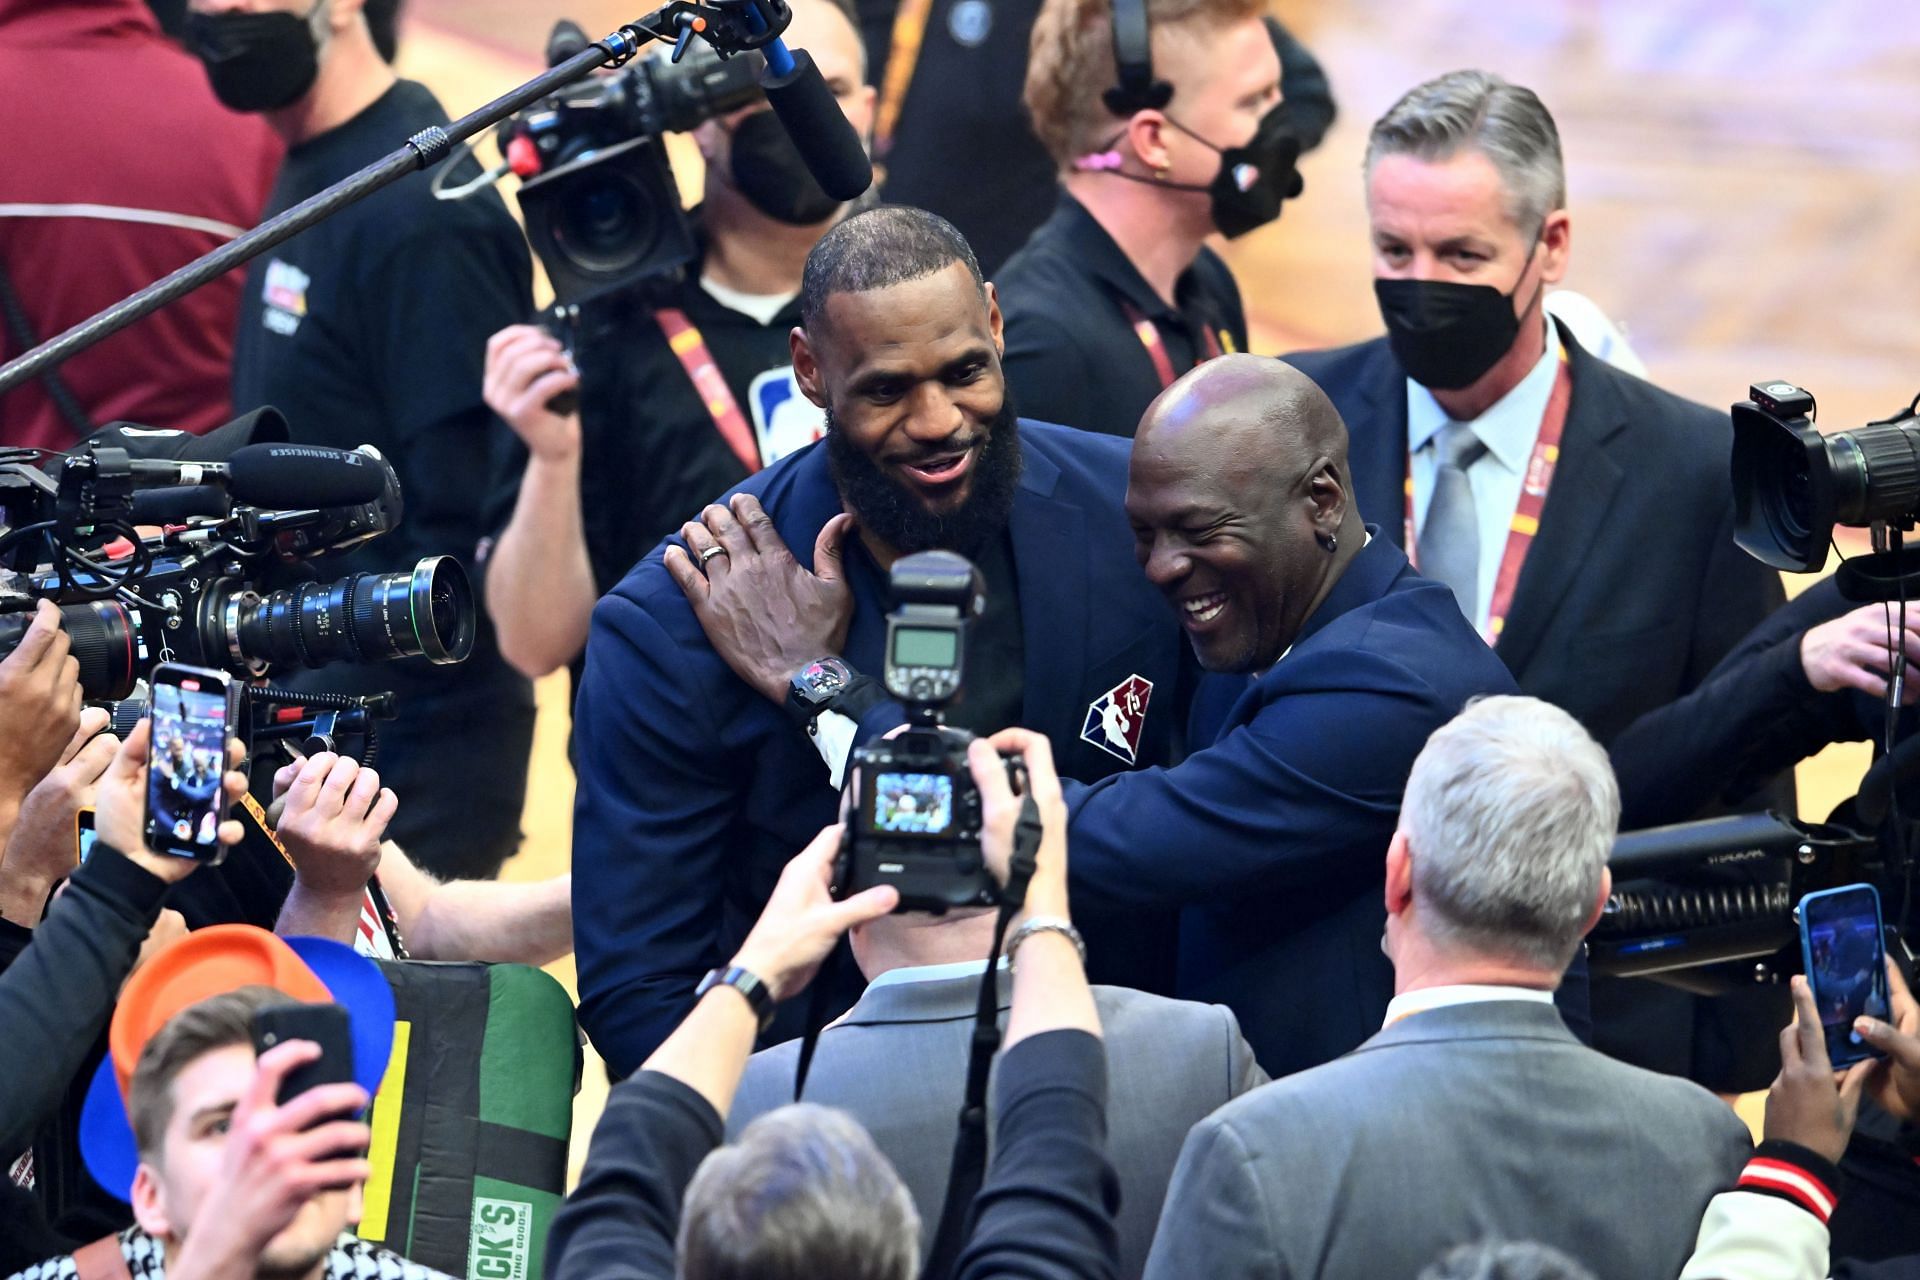 LeBron James and Michael Jordan embrace each other during the All-Star Weekend